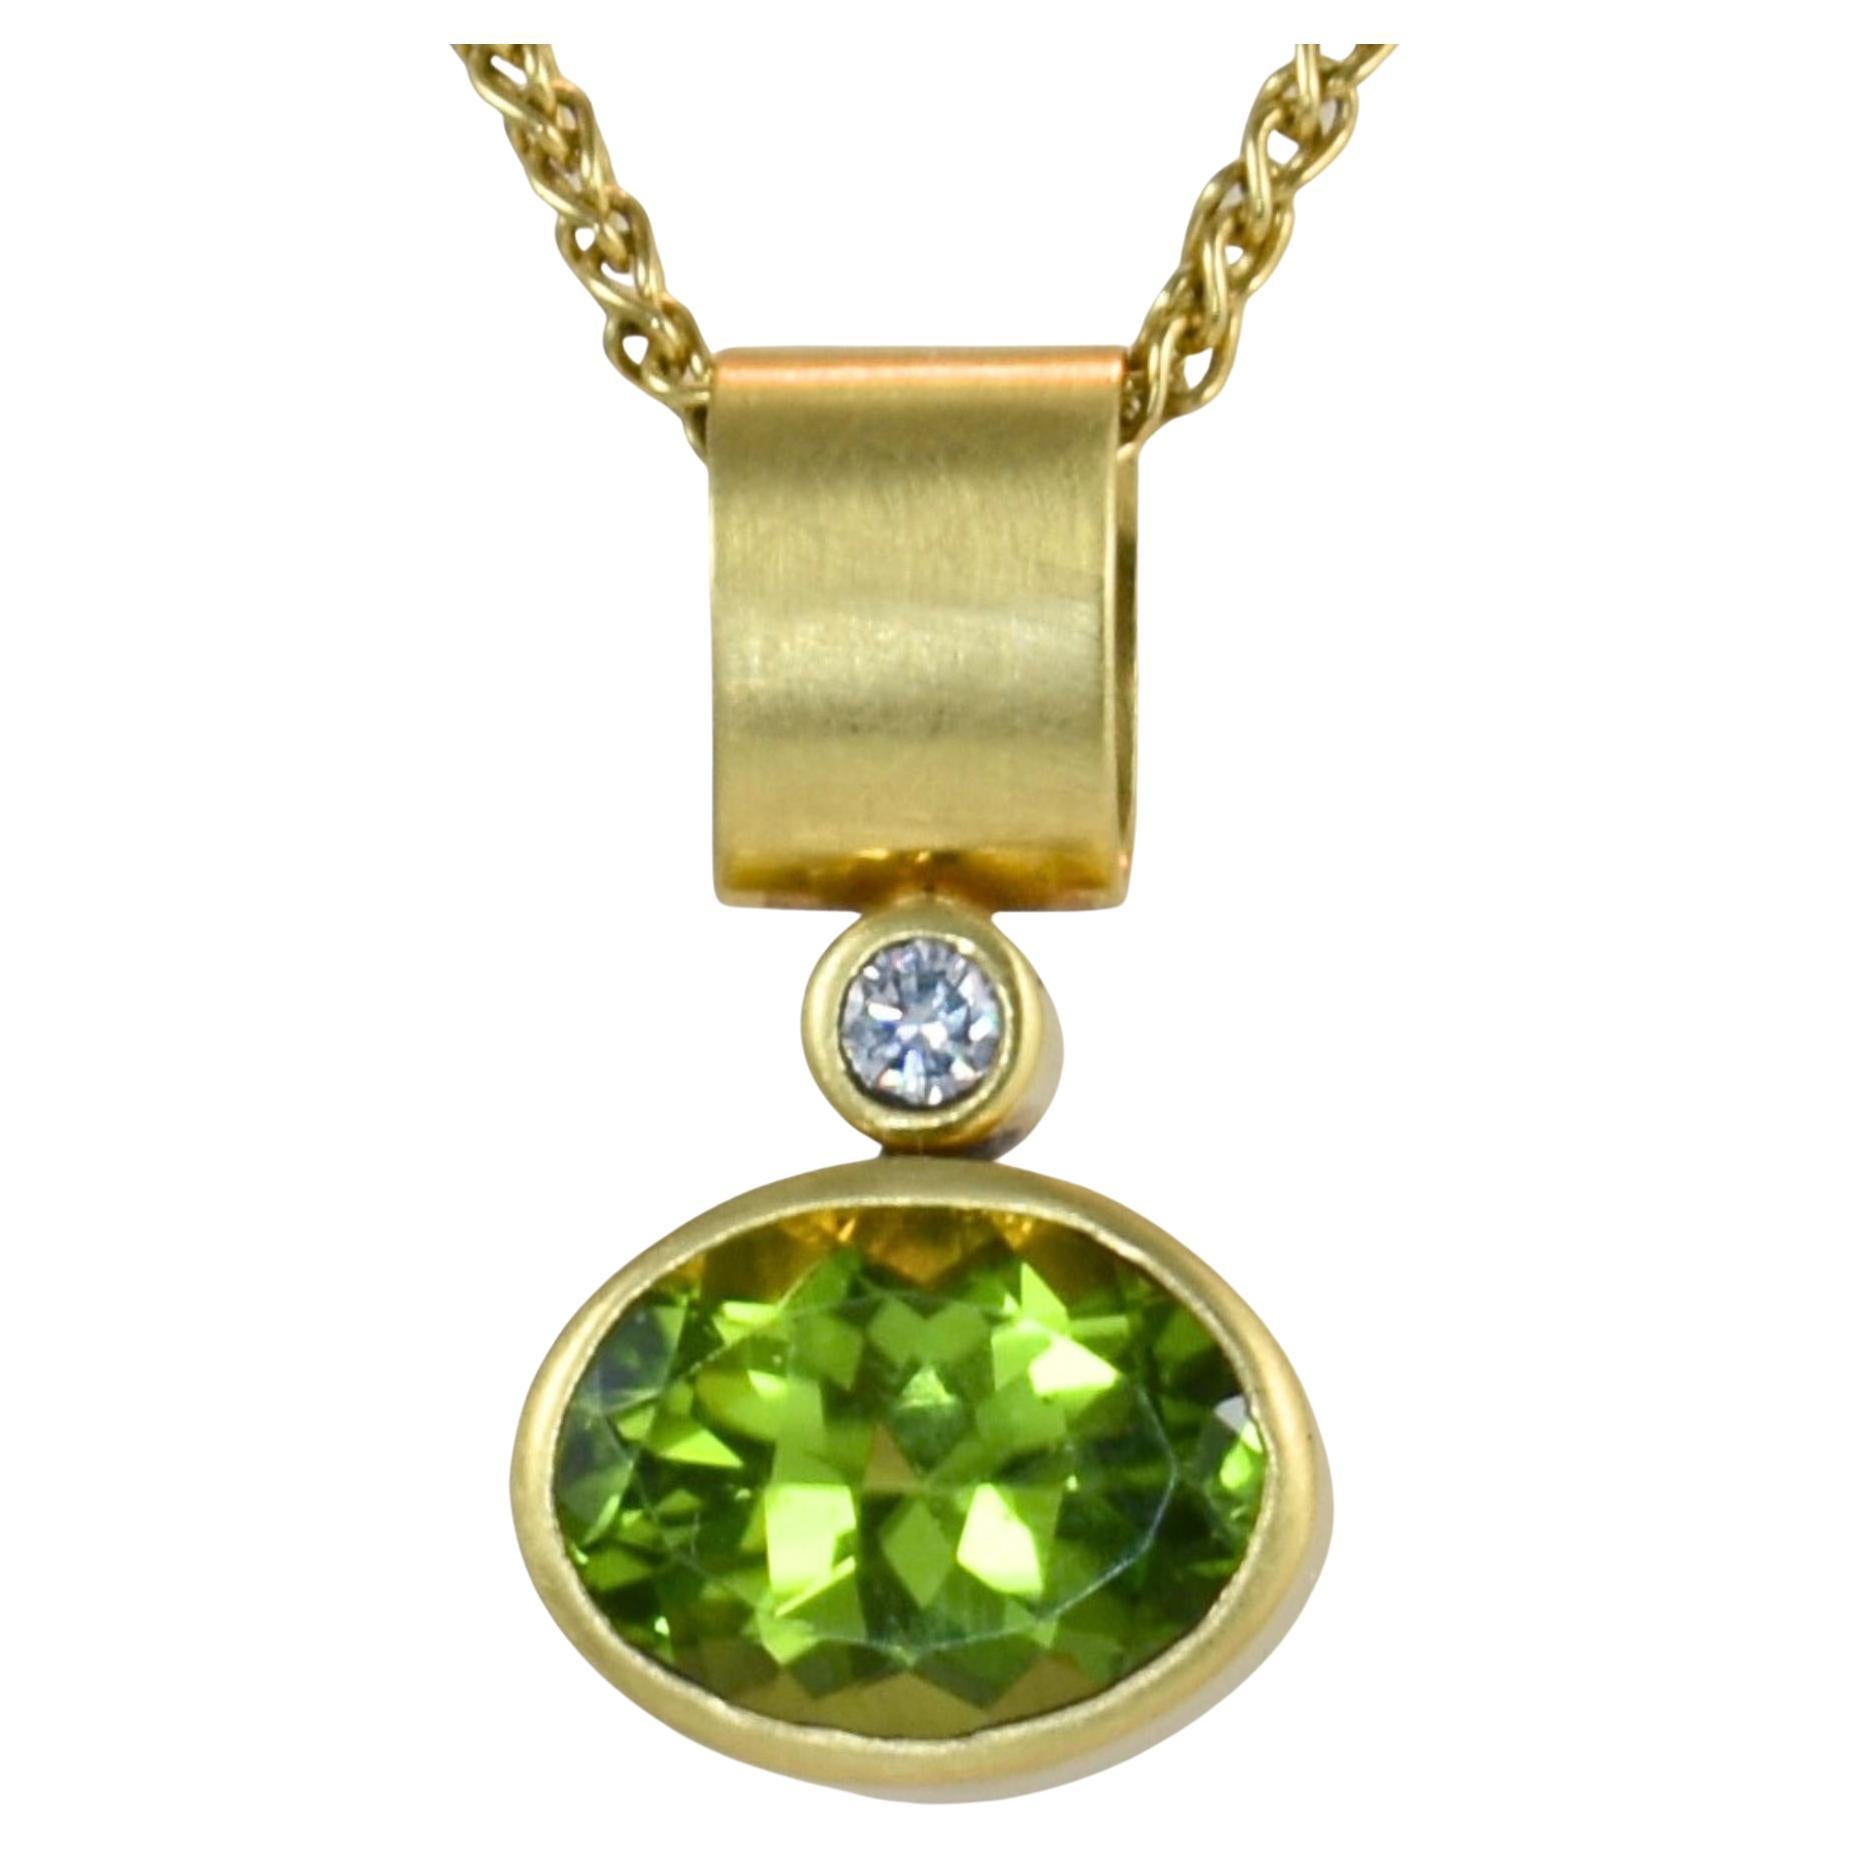 Discover the elegance of our Peridot Diamond Minimalist Pendant - an exquisite blend of radiant Pakistani peridot set in a luxurious satin 18K bezel, elevated with the dazzling twinkle of a brilliant diamond. This unique piece is meticulously